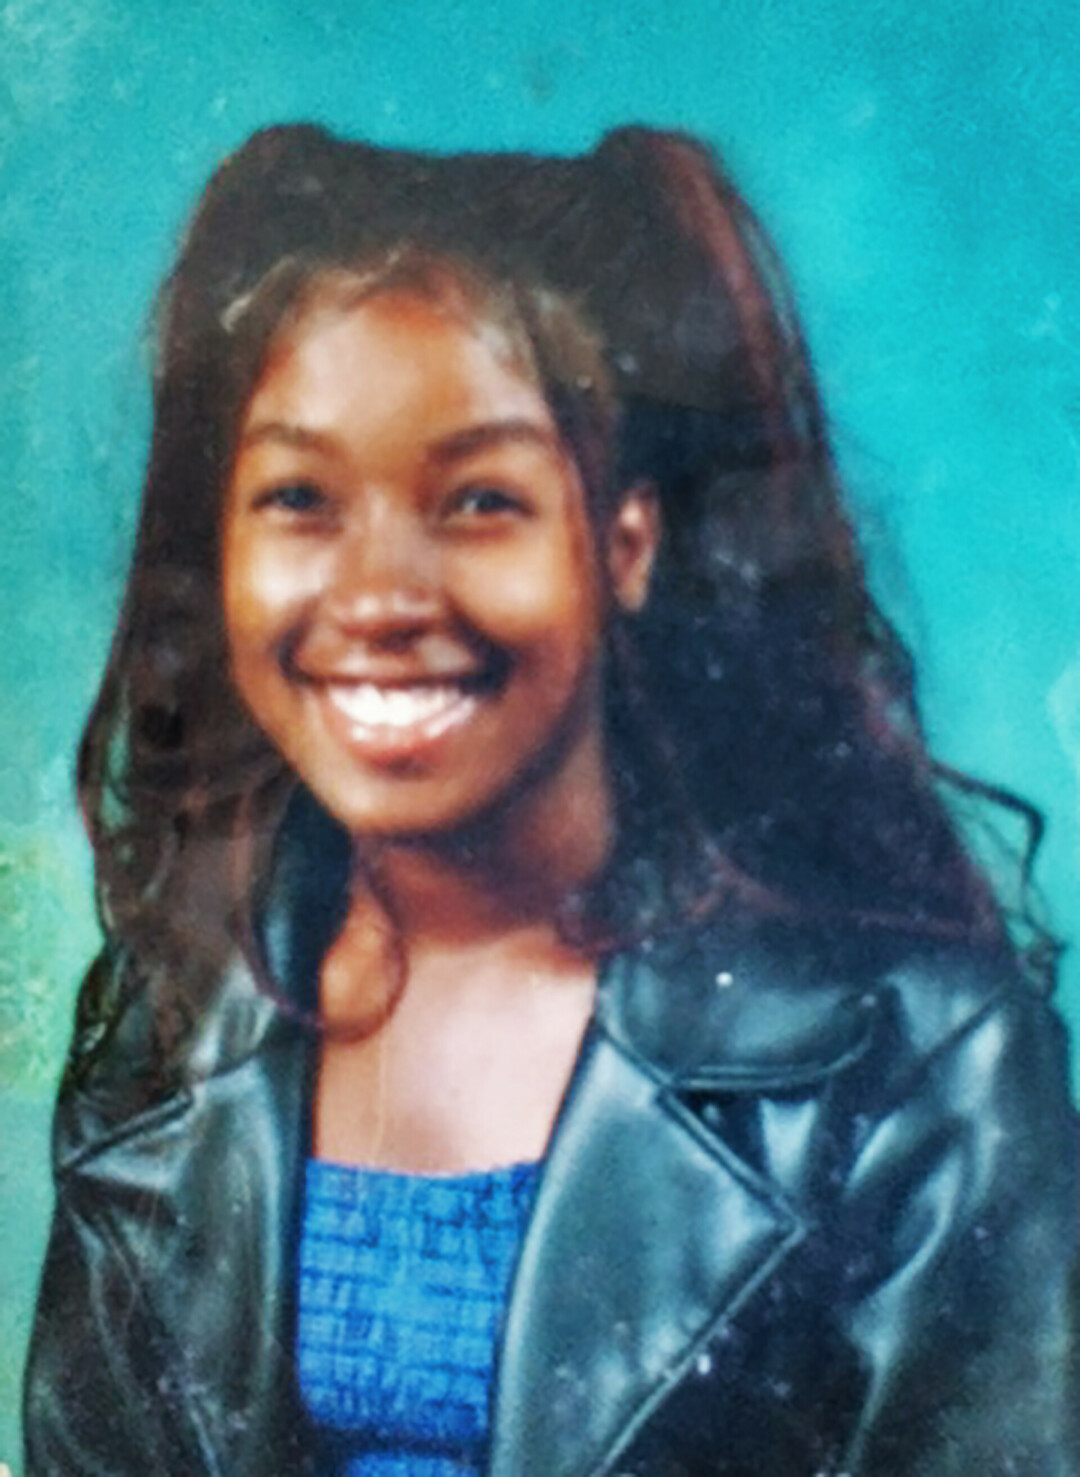 Jeneise Briggs, rocking her signature black leather jacket – a second-hand item she received in high school and wore every day throughout college to stay within her university's conservative dress code. (Submitted photo)